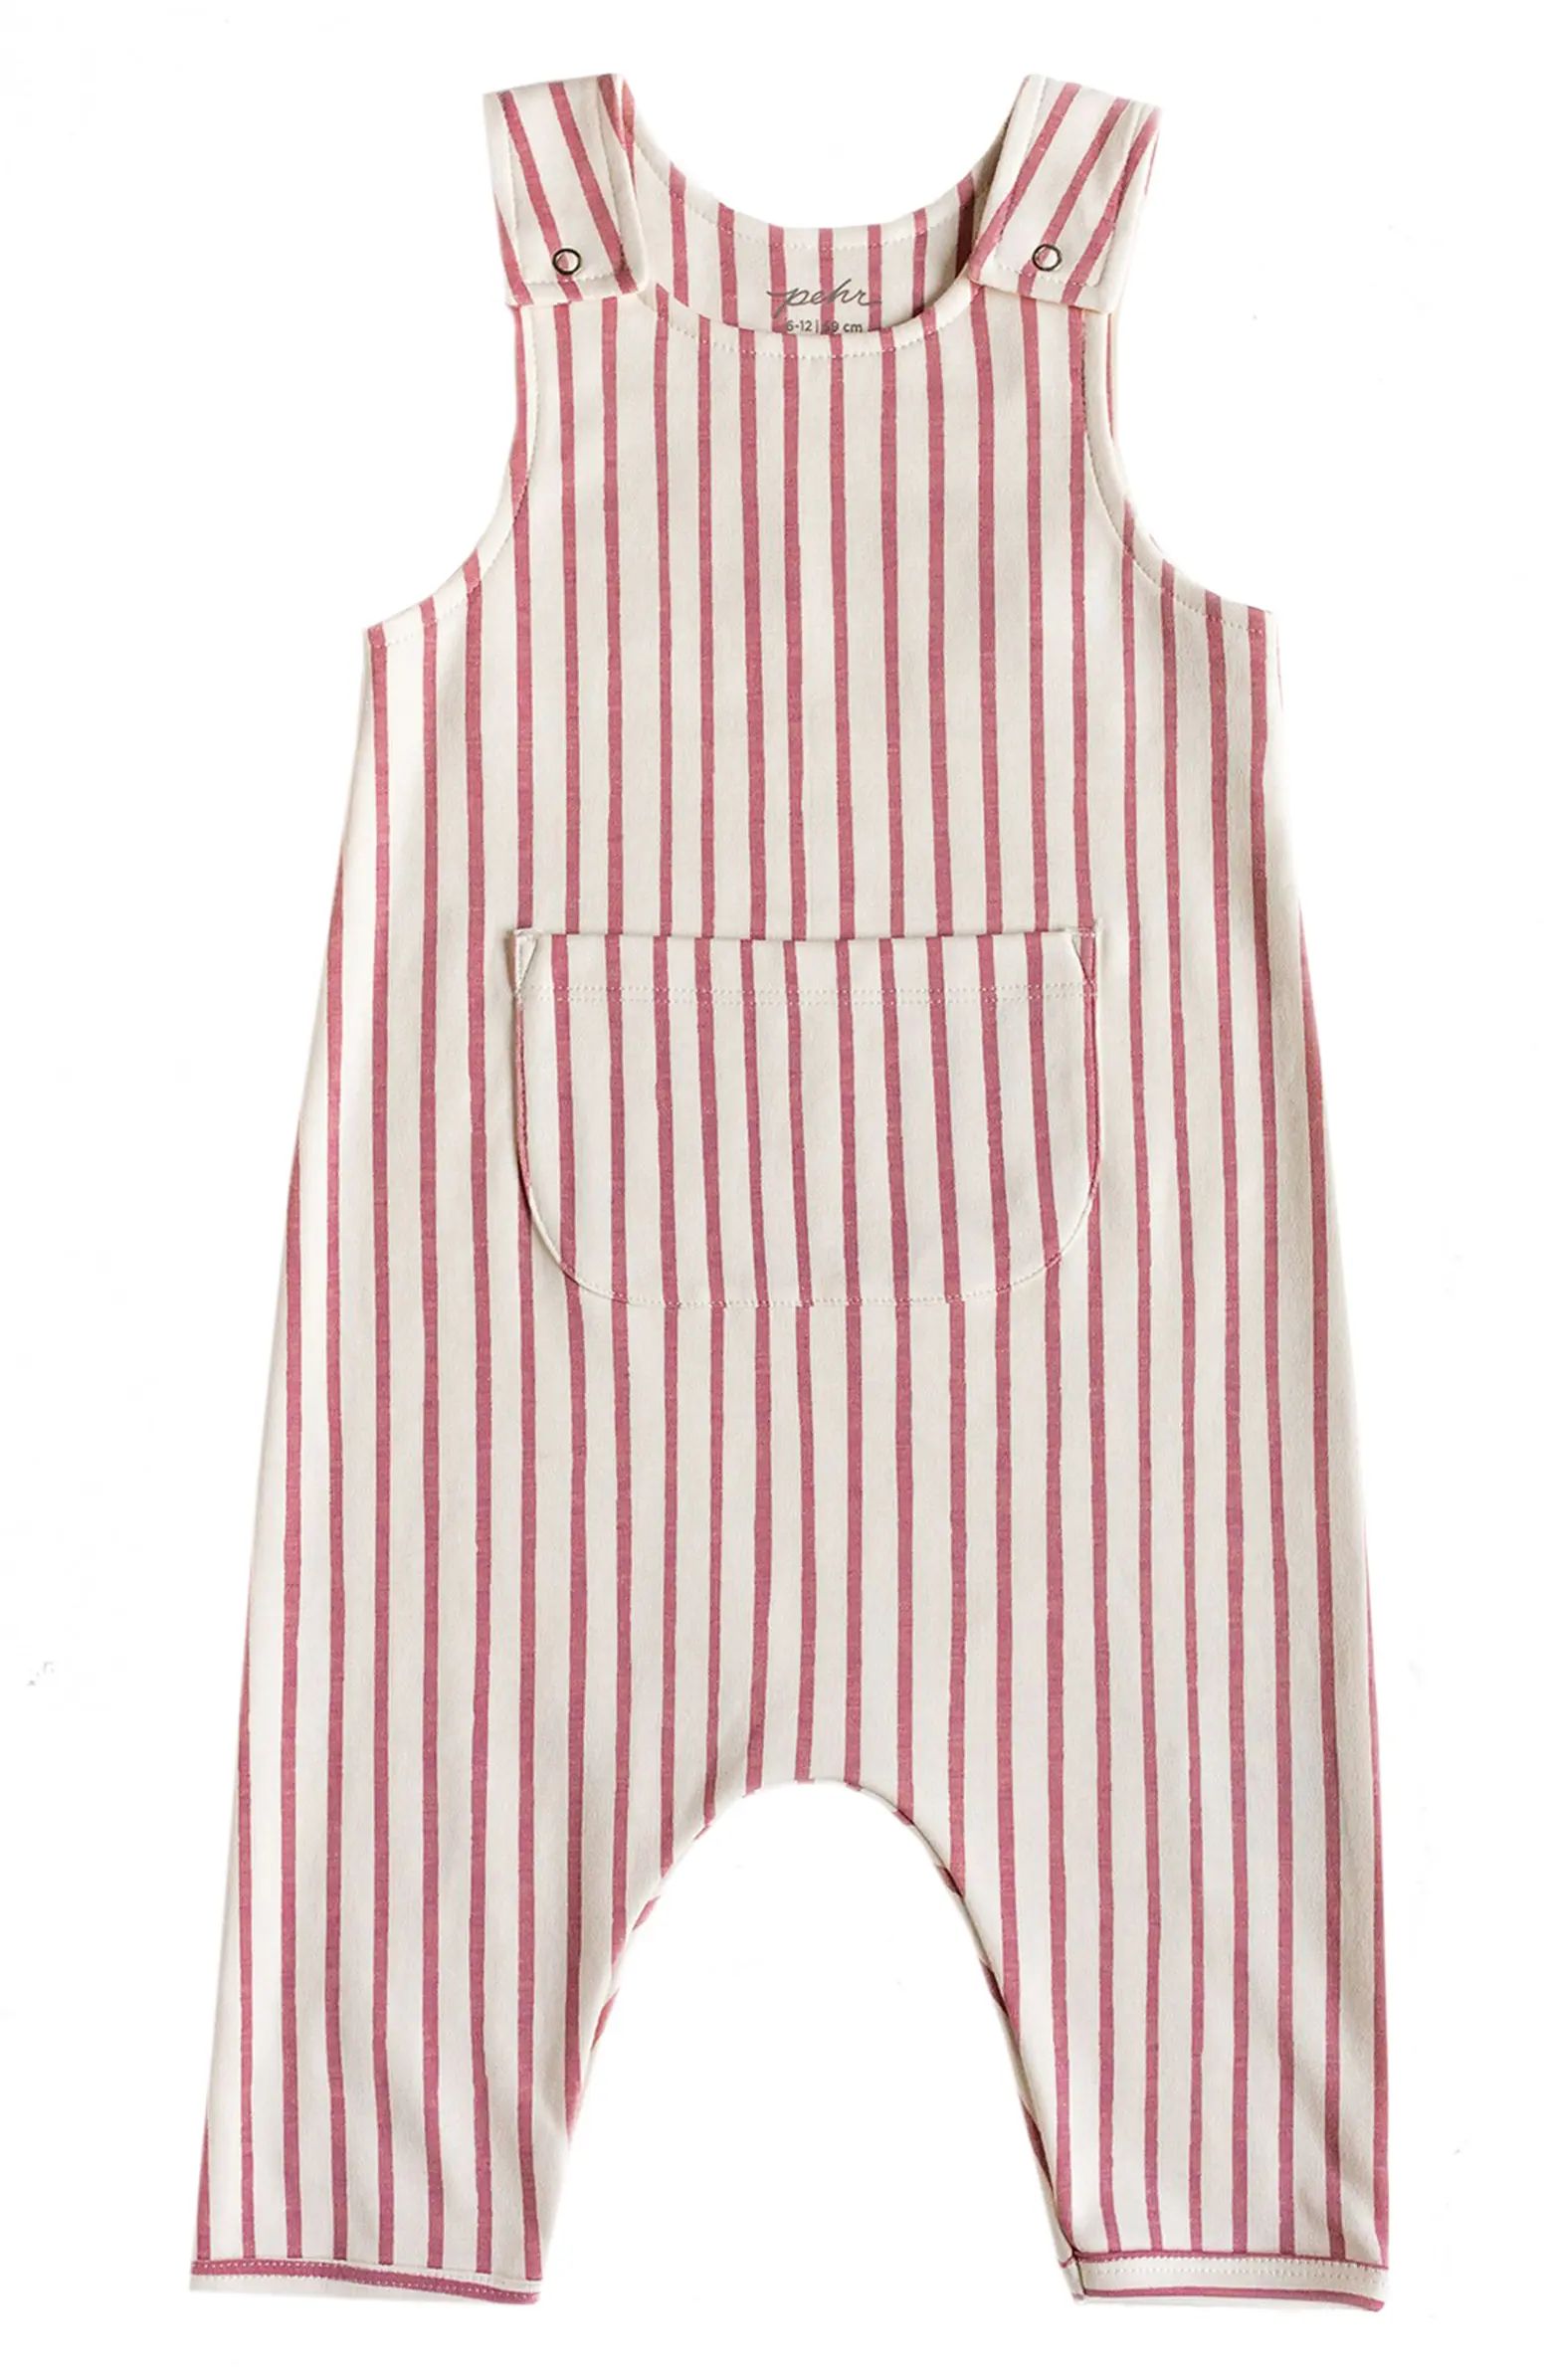 Stripes Away Organic Cotton Overalls | Nordstrom